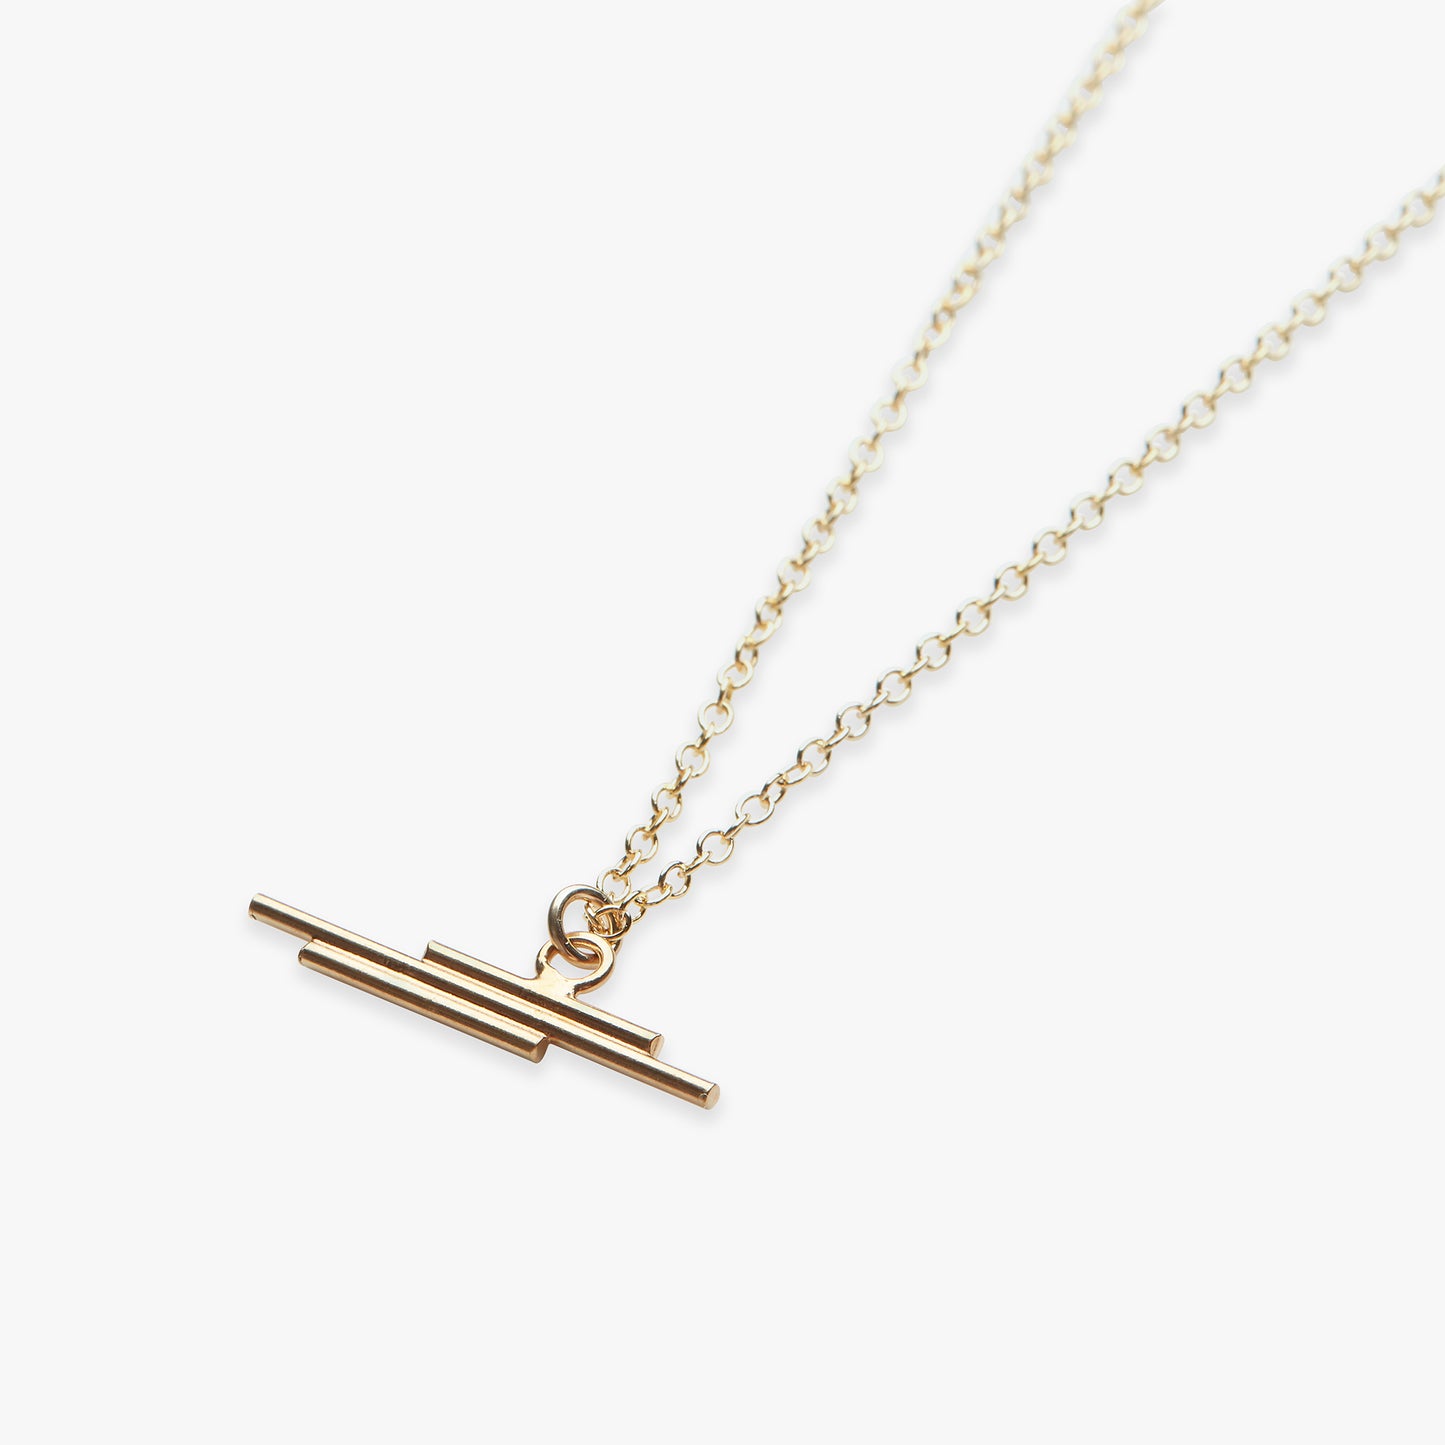 Sideway Lines necklace gold filled